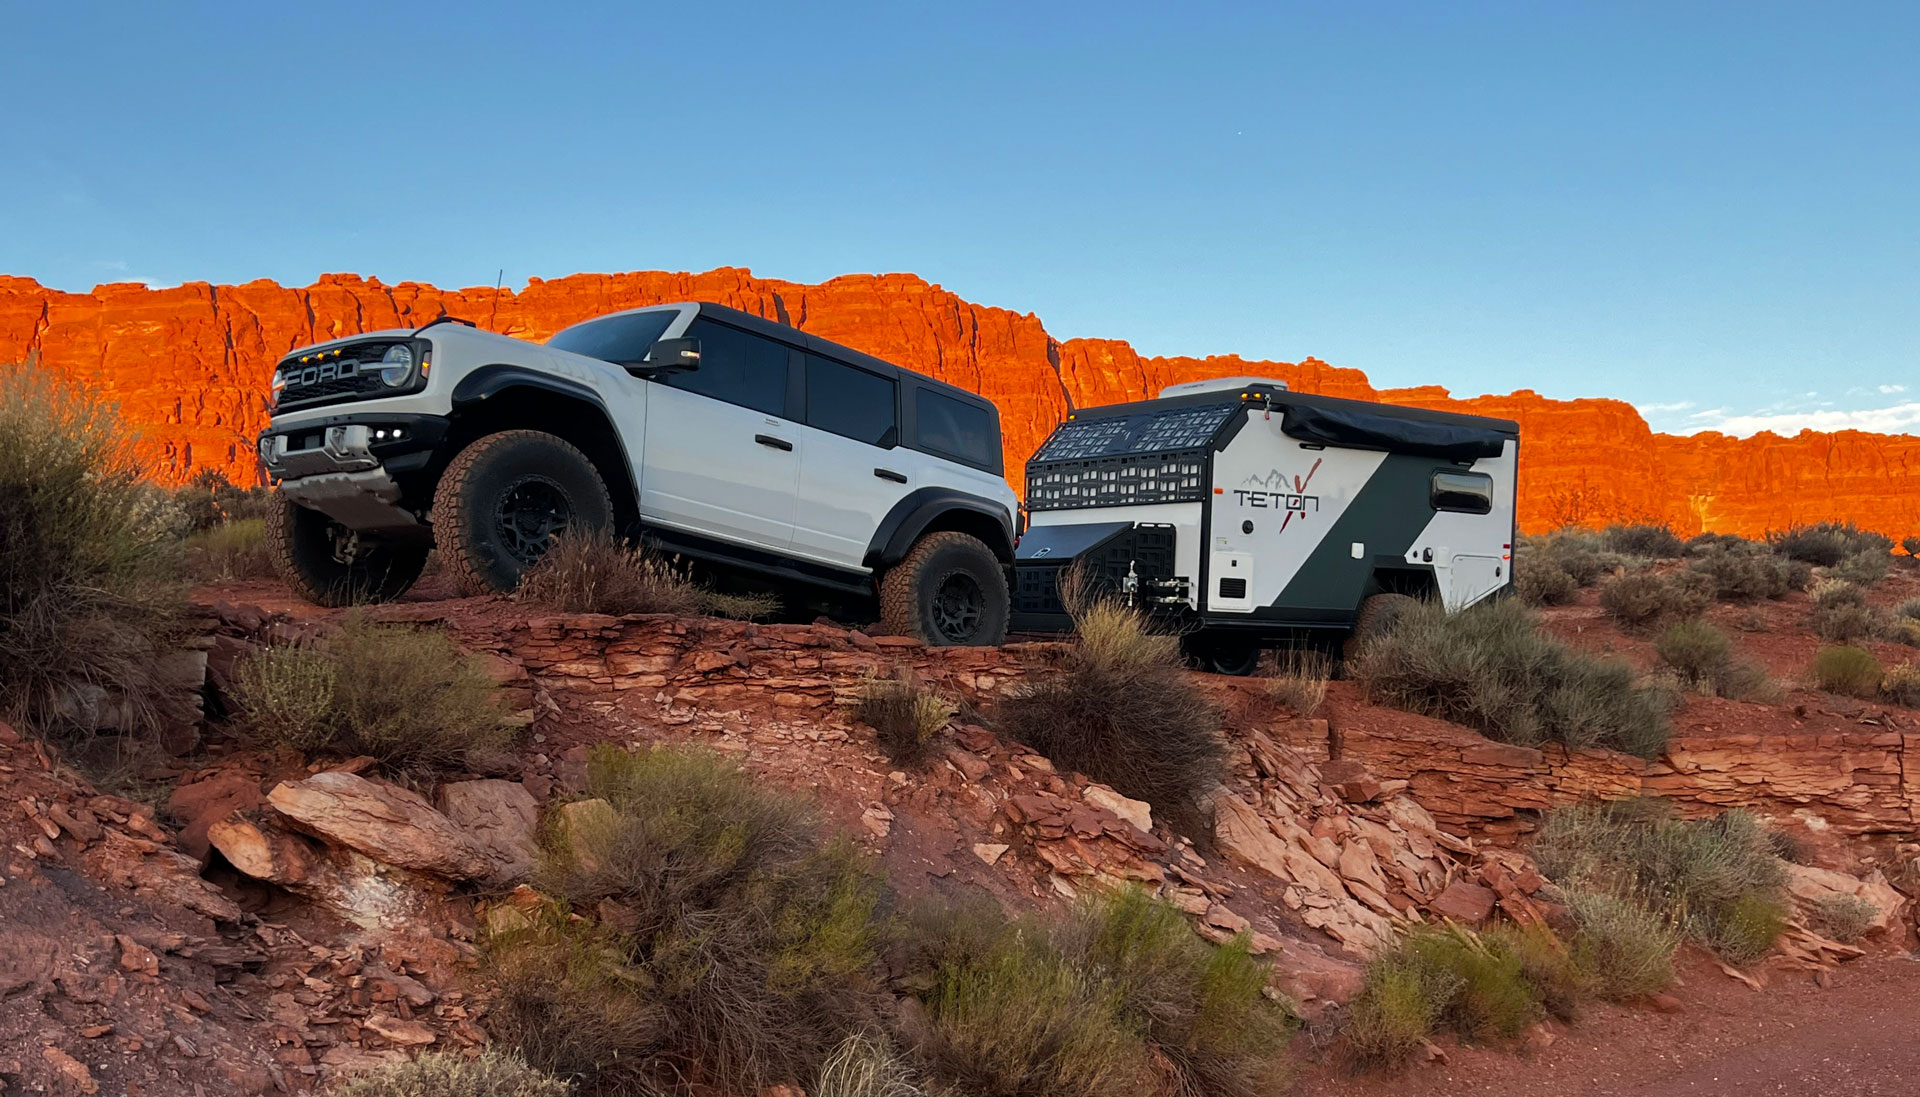 Why Choose Adventure Trailers?